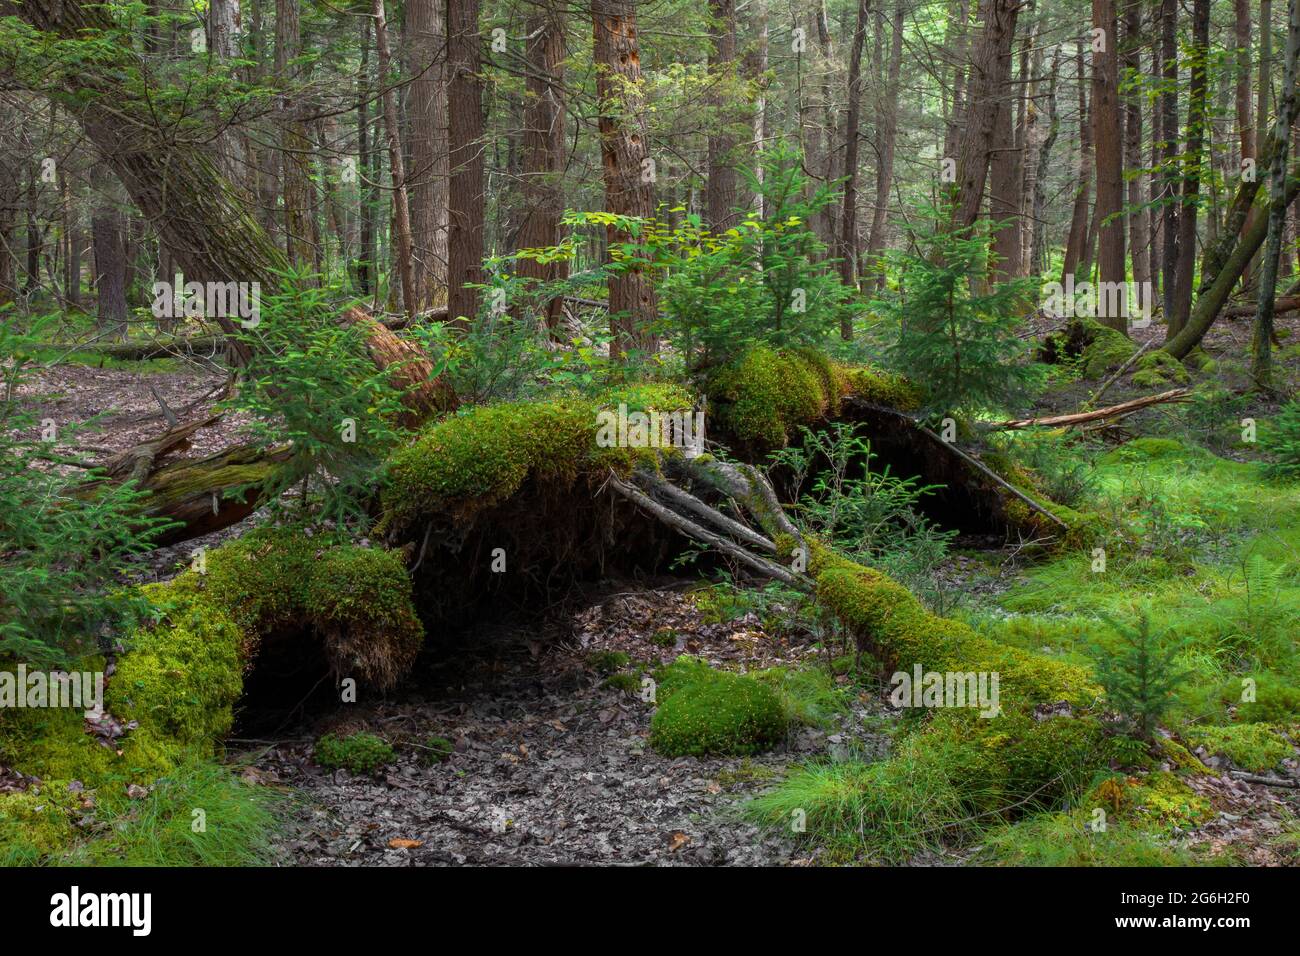 An uprooted eastern hemlock tree, The exposed soil is now creating a seedbed for moss and tree seedling.  It is now known as a 'nurse log'. Stock Photo